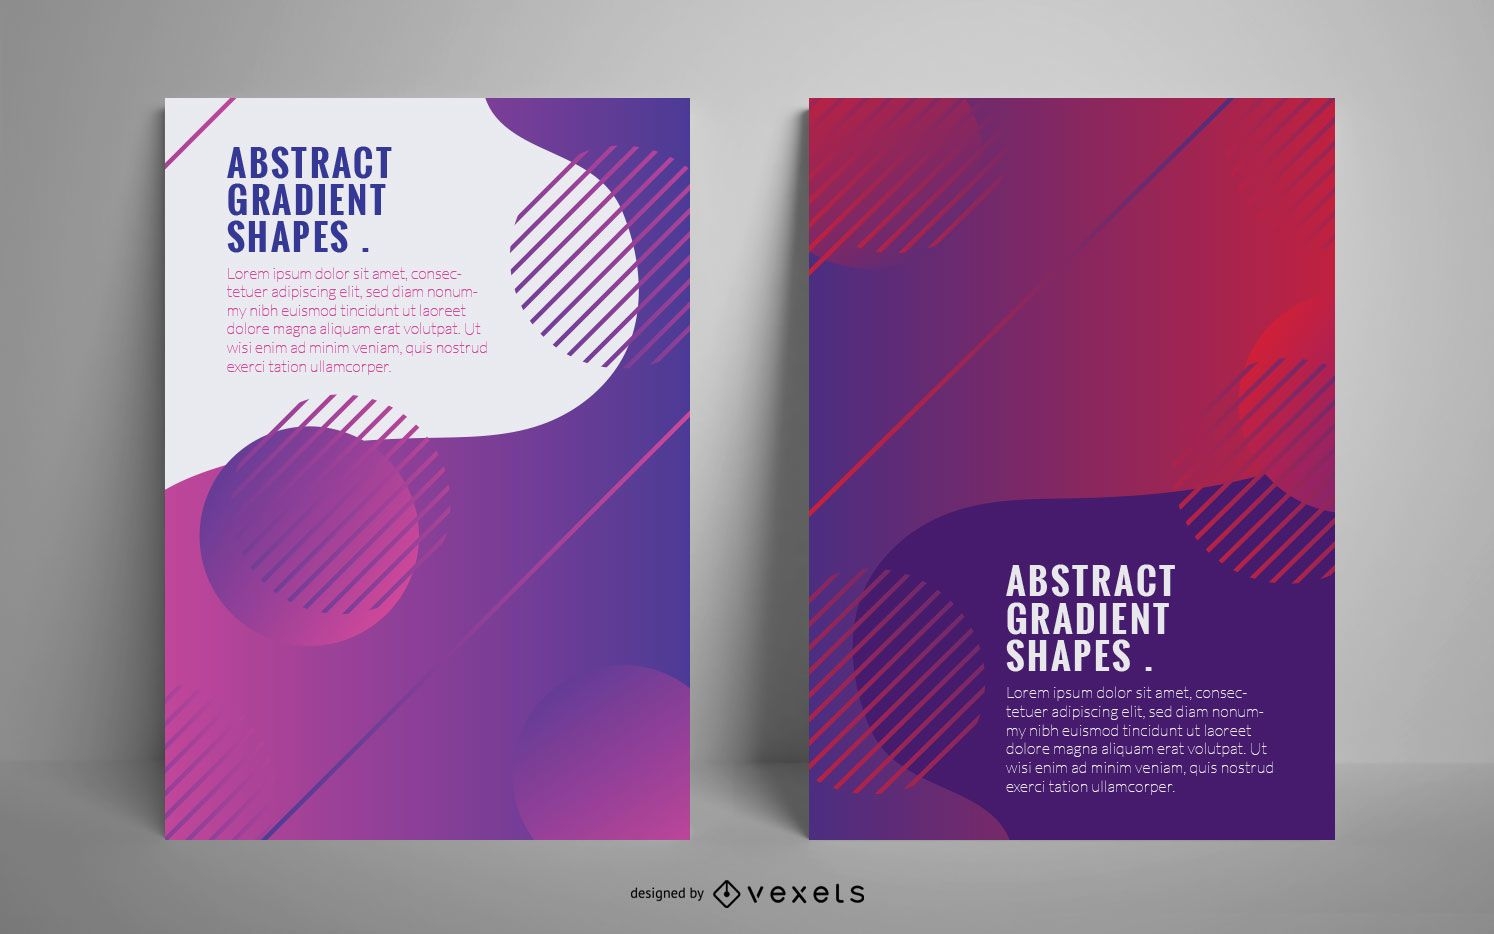 Abstract gradient shapes poster